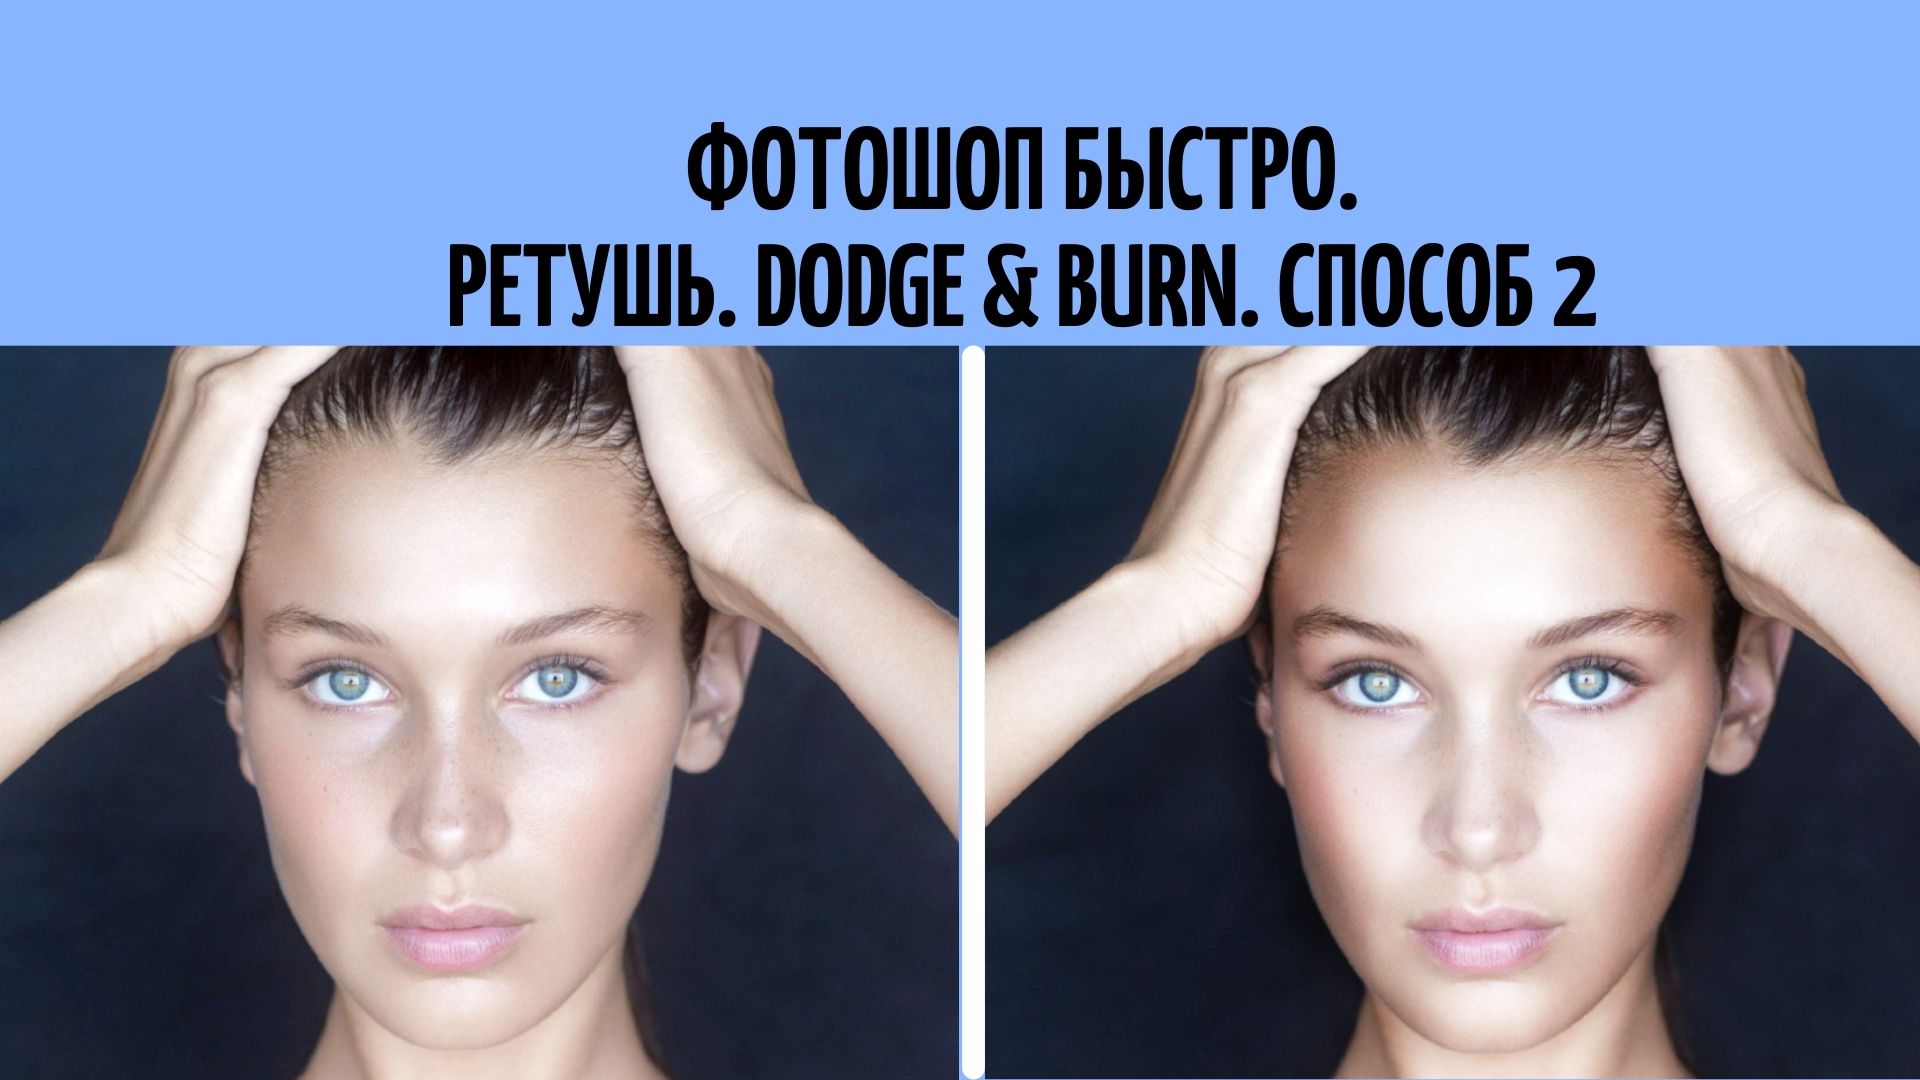 4 Ways to Burn and Dodge in Photoshop | Visual Education